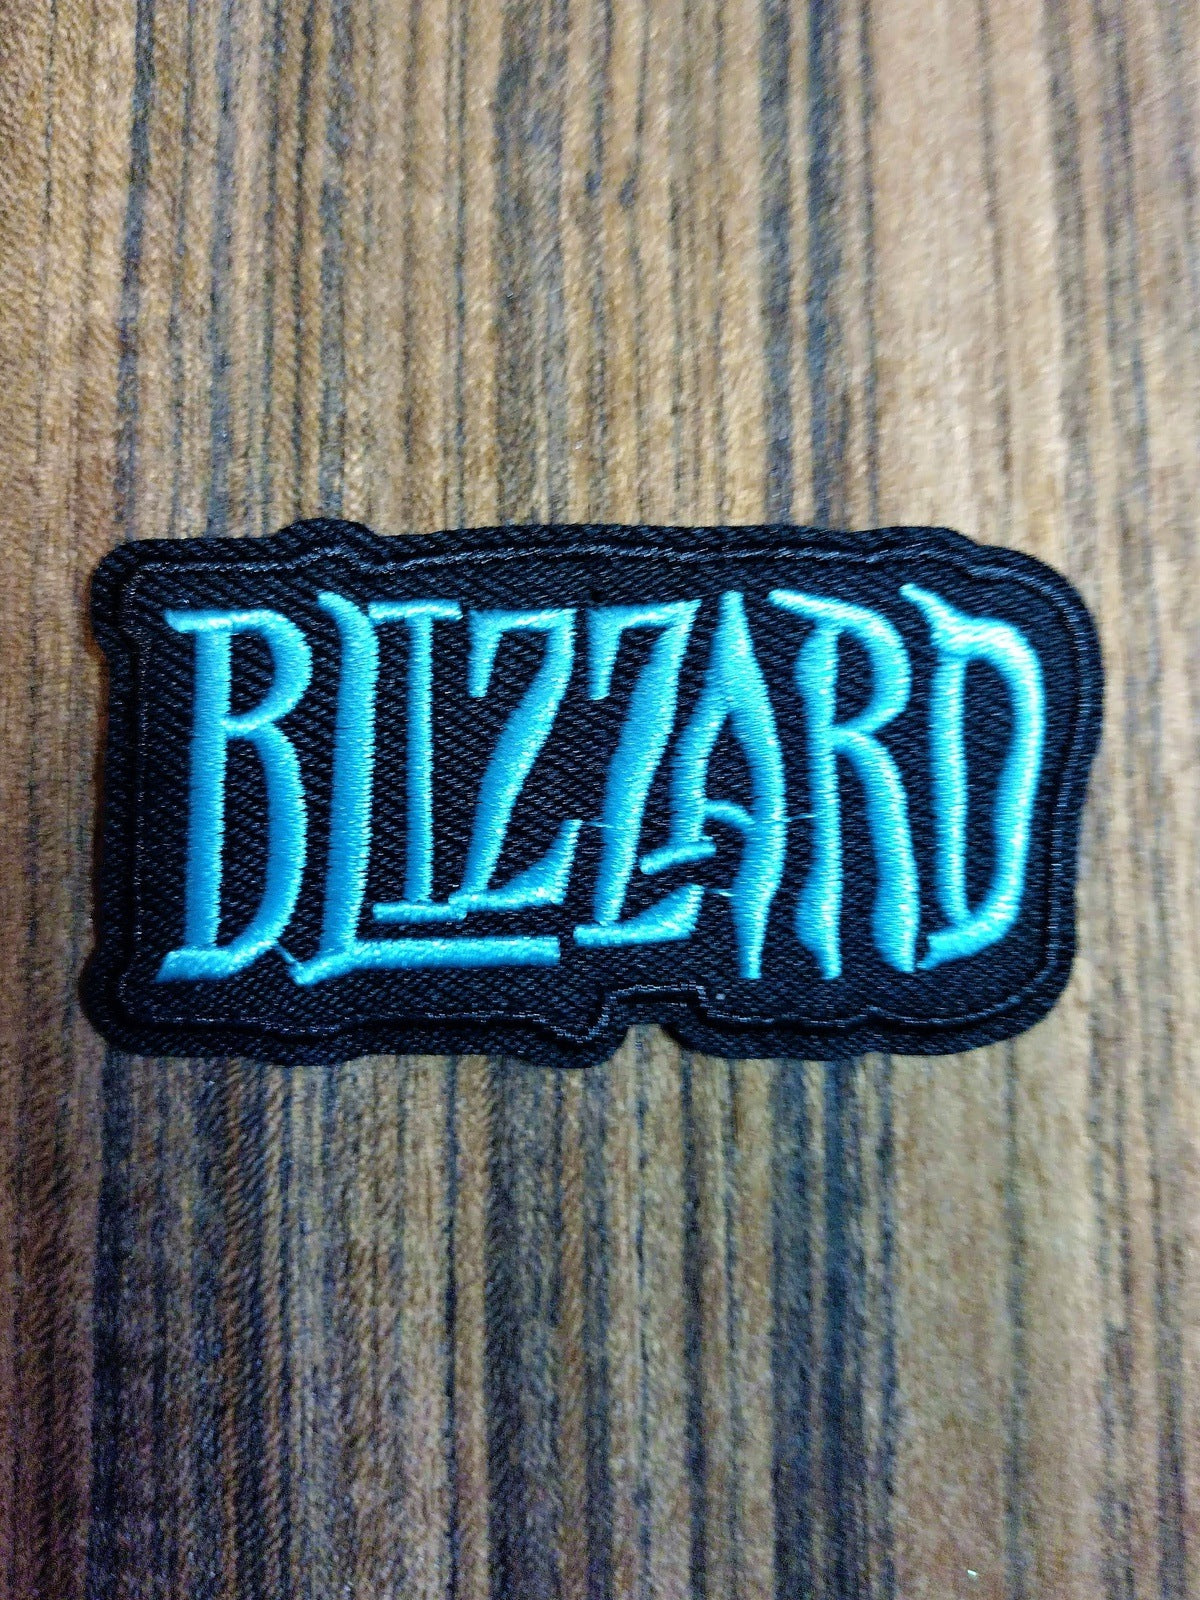 Blizzard Patch approx. 2.5 inches